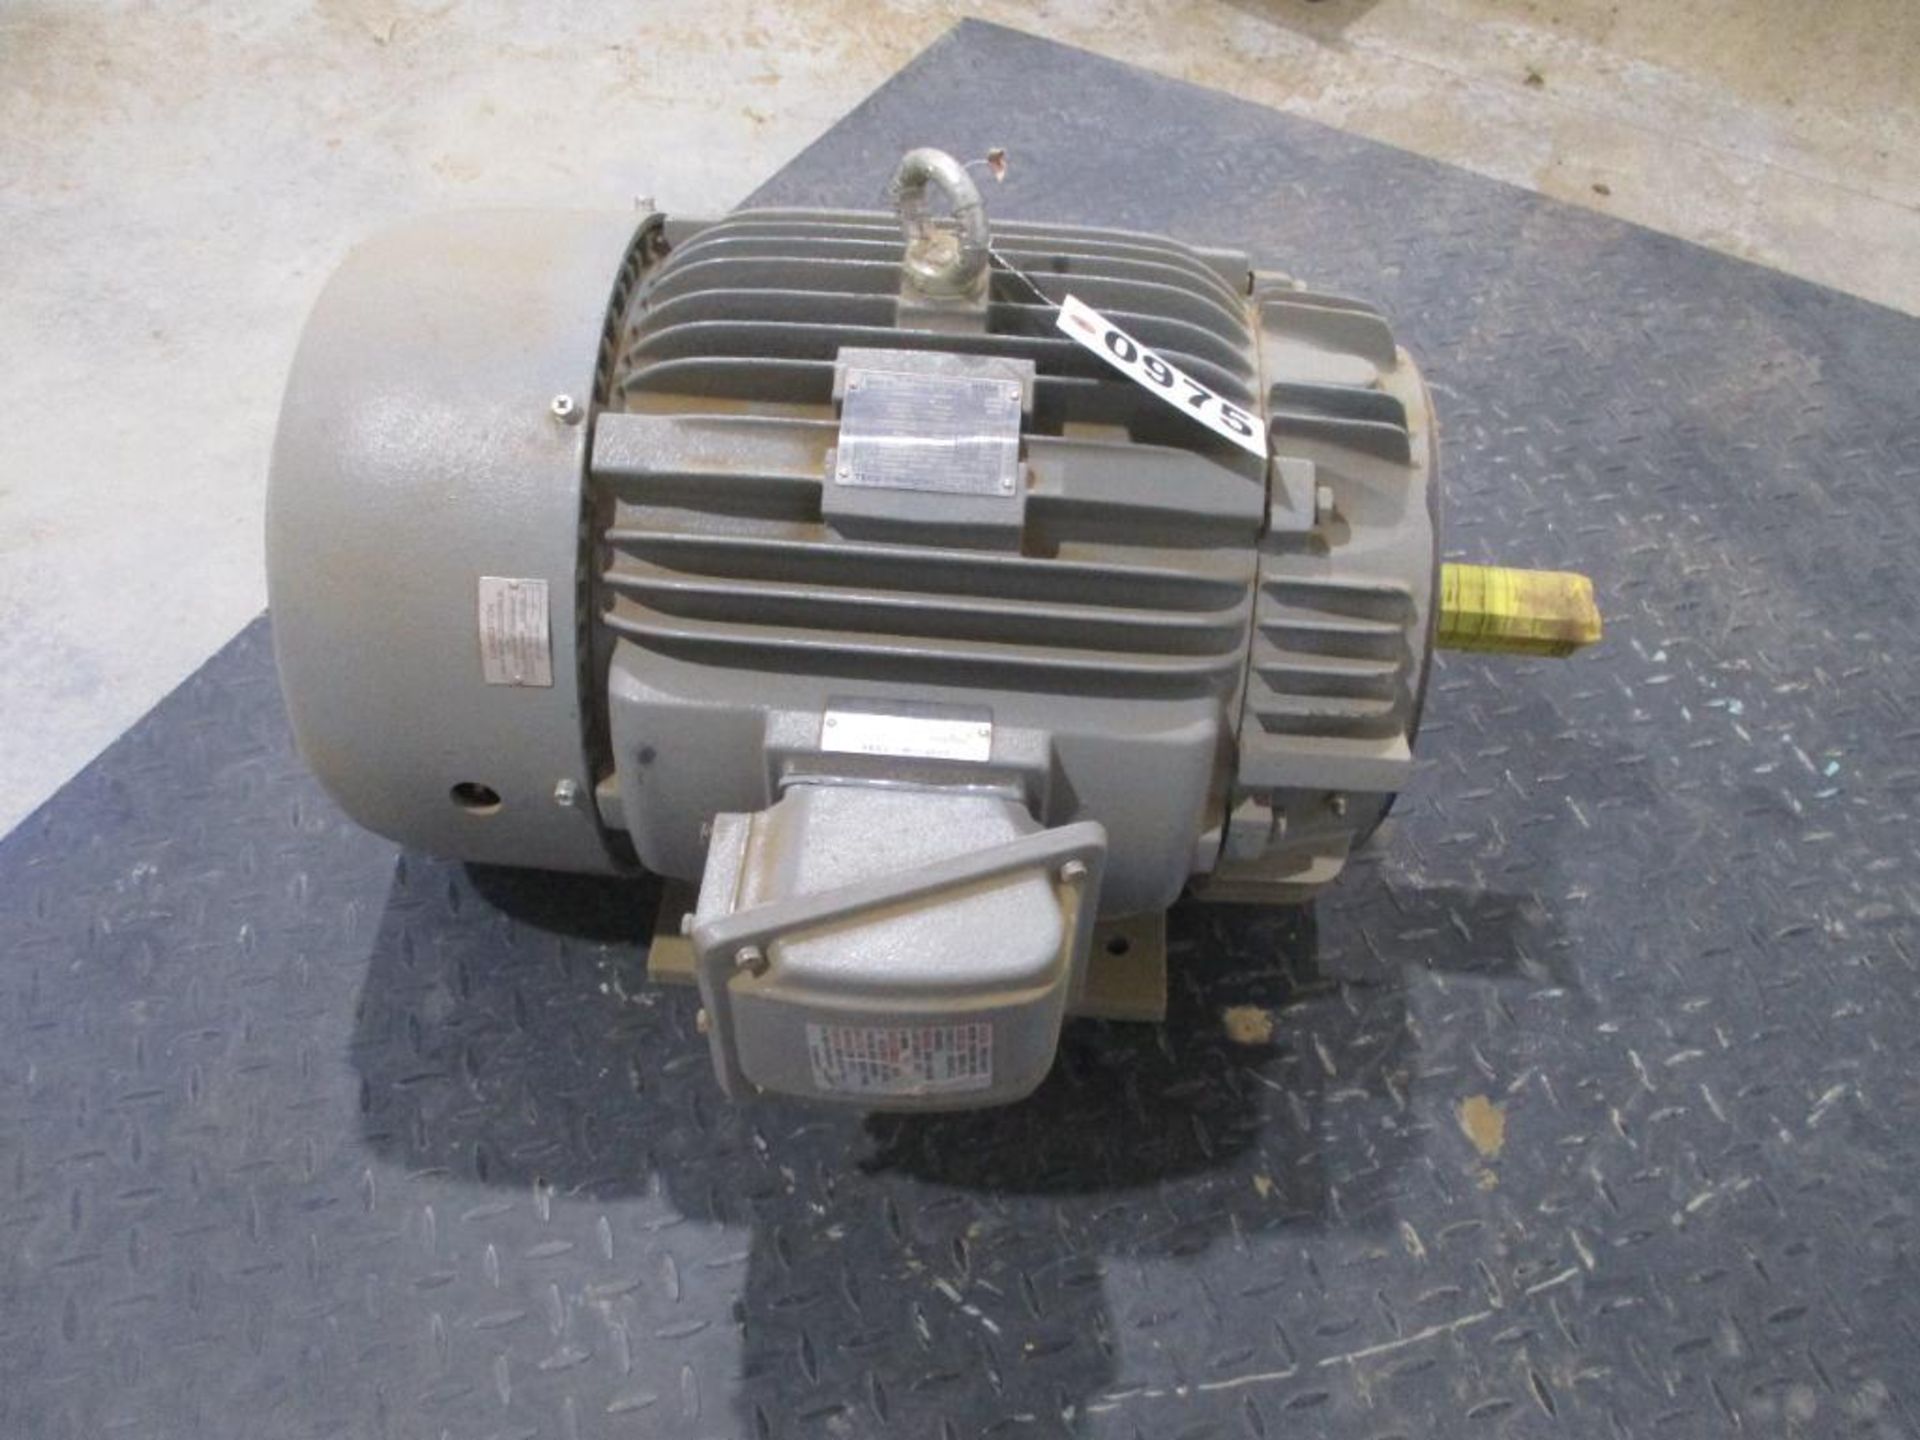 WESTINGHOUSE 3 PHASE 25HP 1460-1765RPM 284TC FRAME A/C MOTOR P/N EP0254C, 468# lbs (There will be a